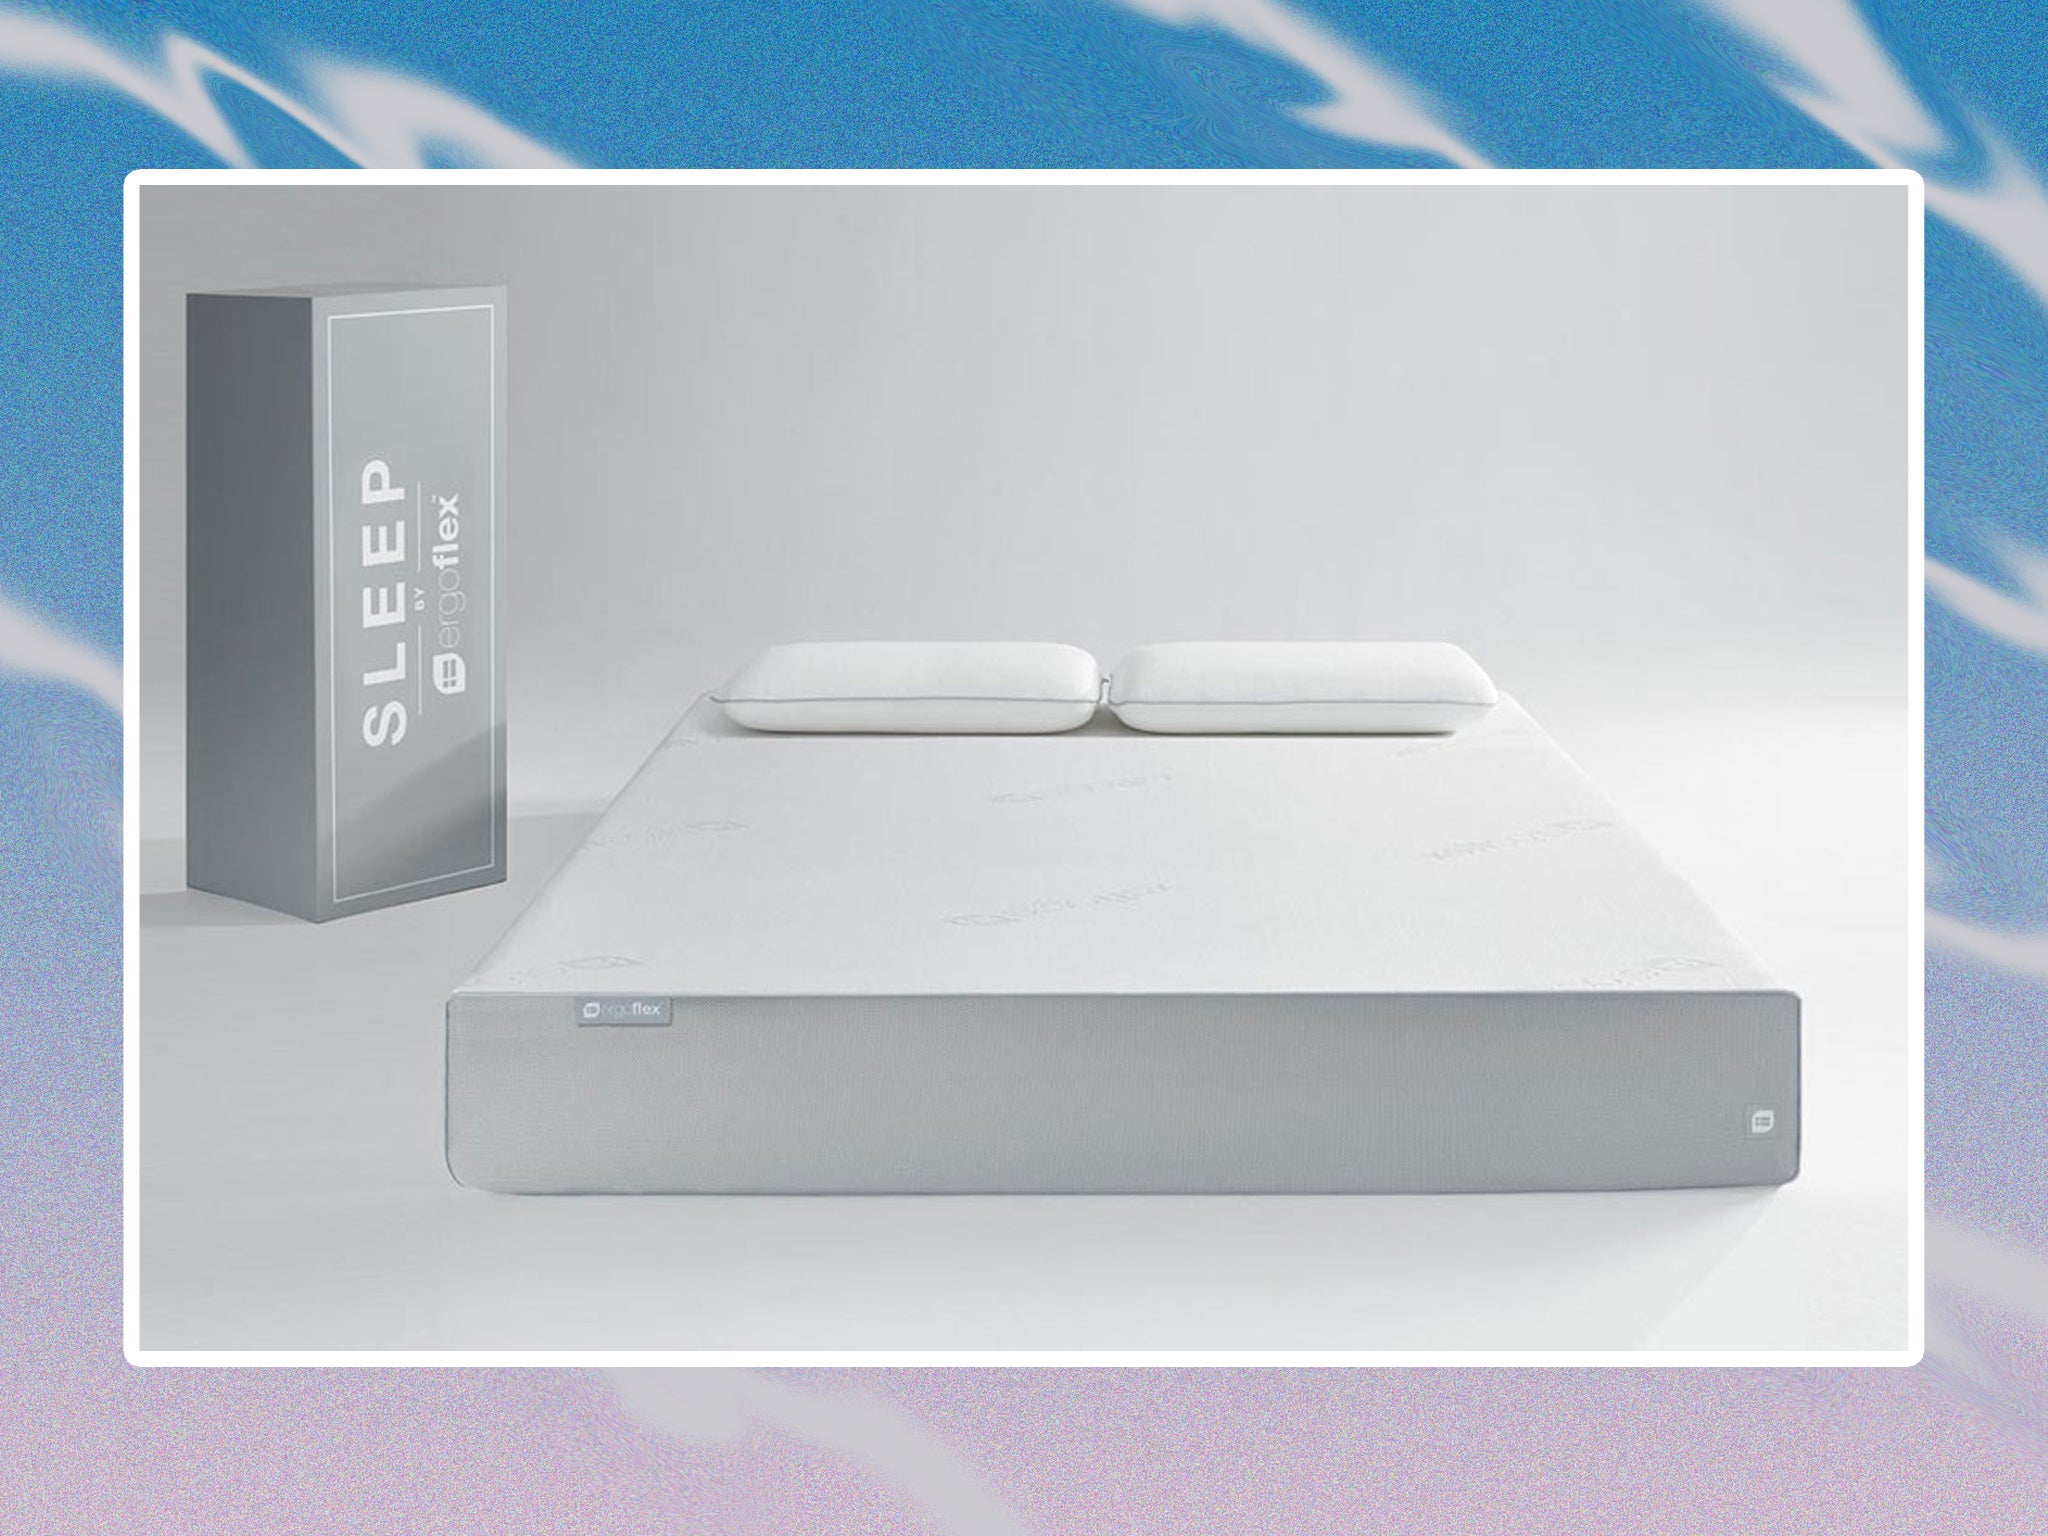 Ergoflex 5G mattress is a comfortable bed-in-a-box – and it’s now half price